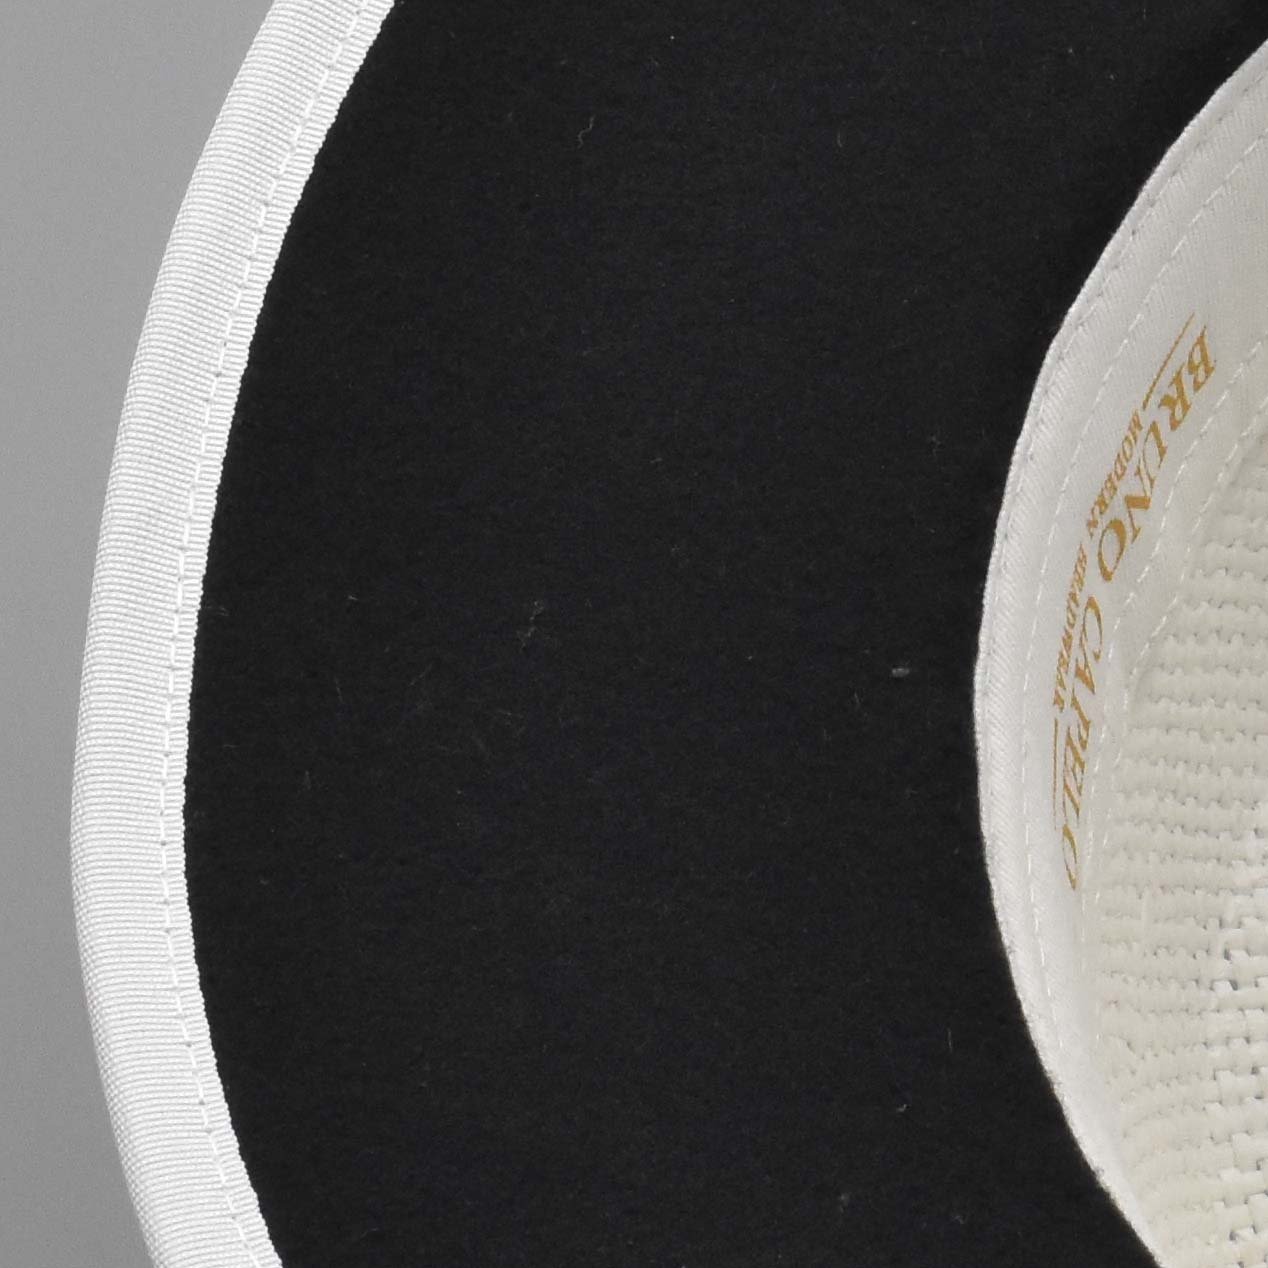 bottom of a black and white fedora hat